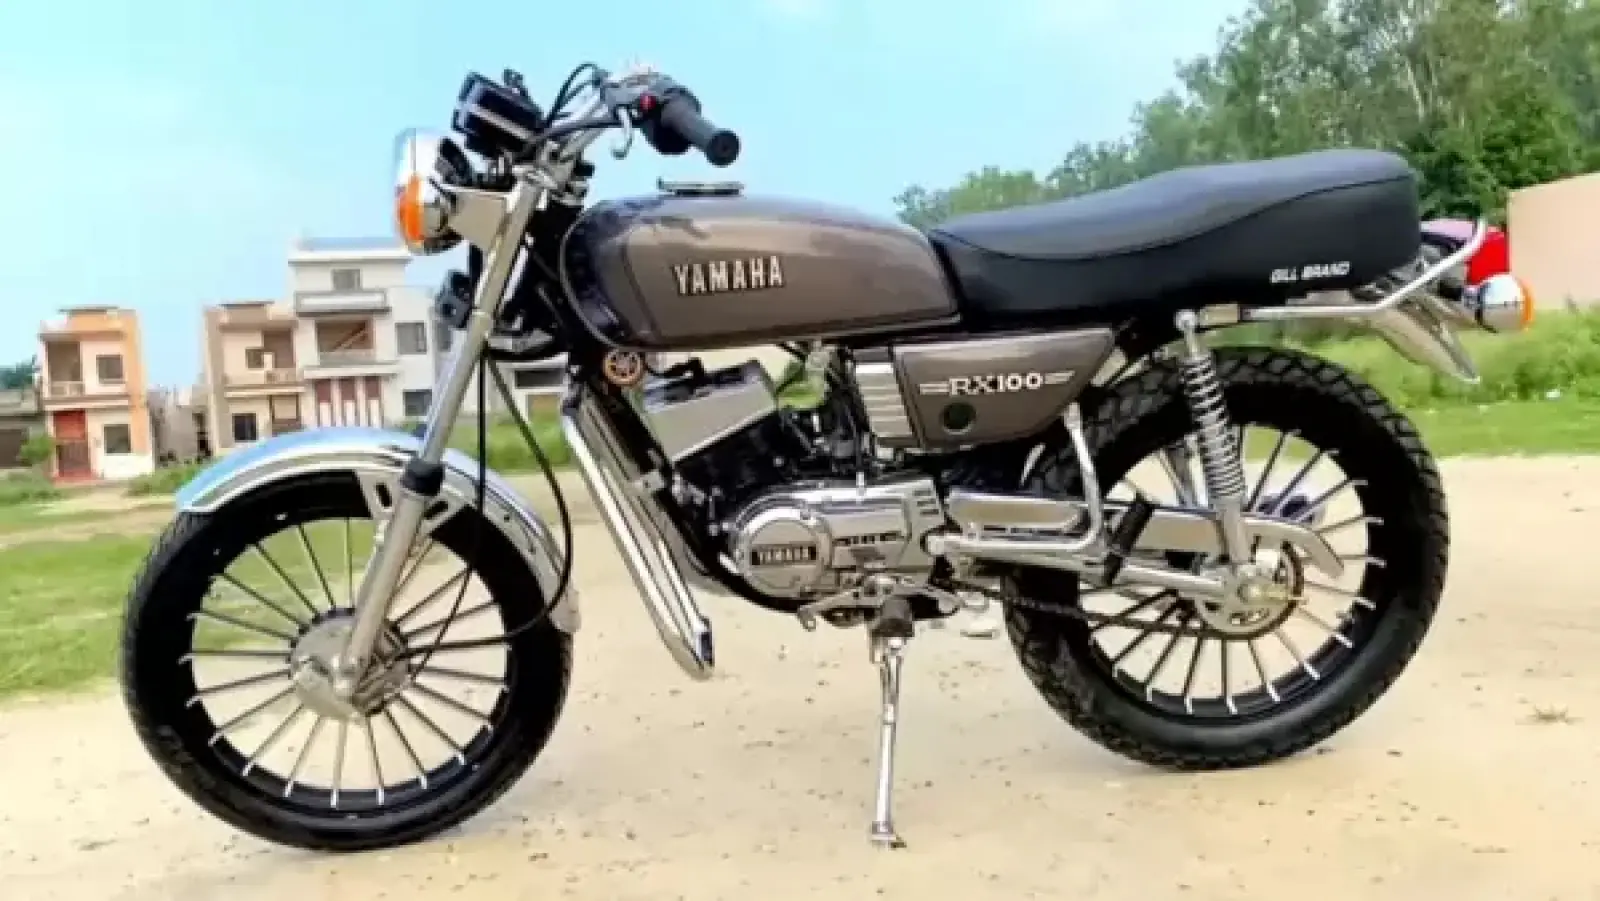 Yamaha RX100 will soon return to India, will enter with this new update